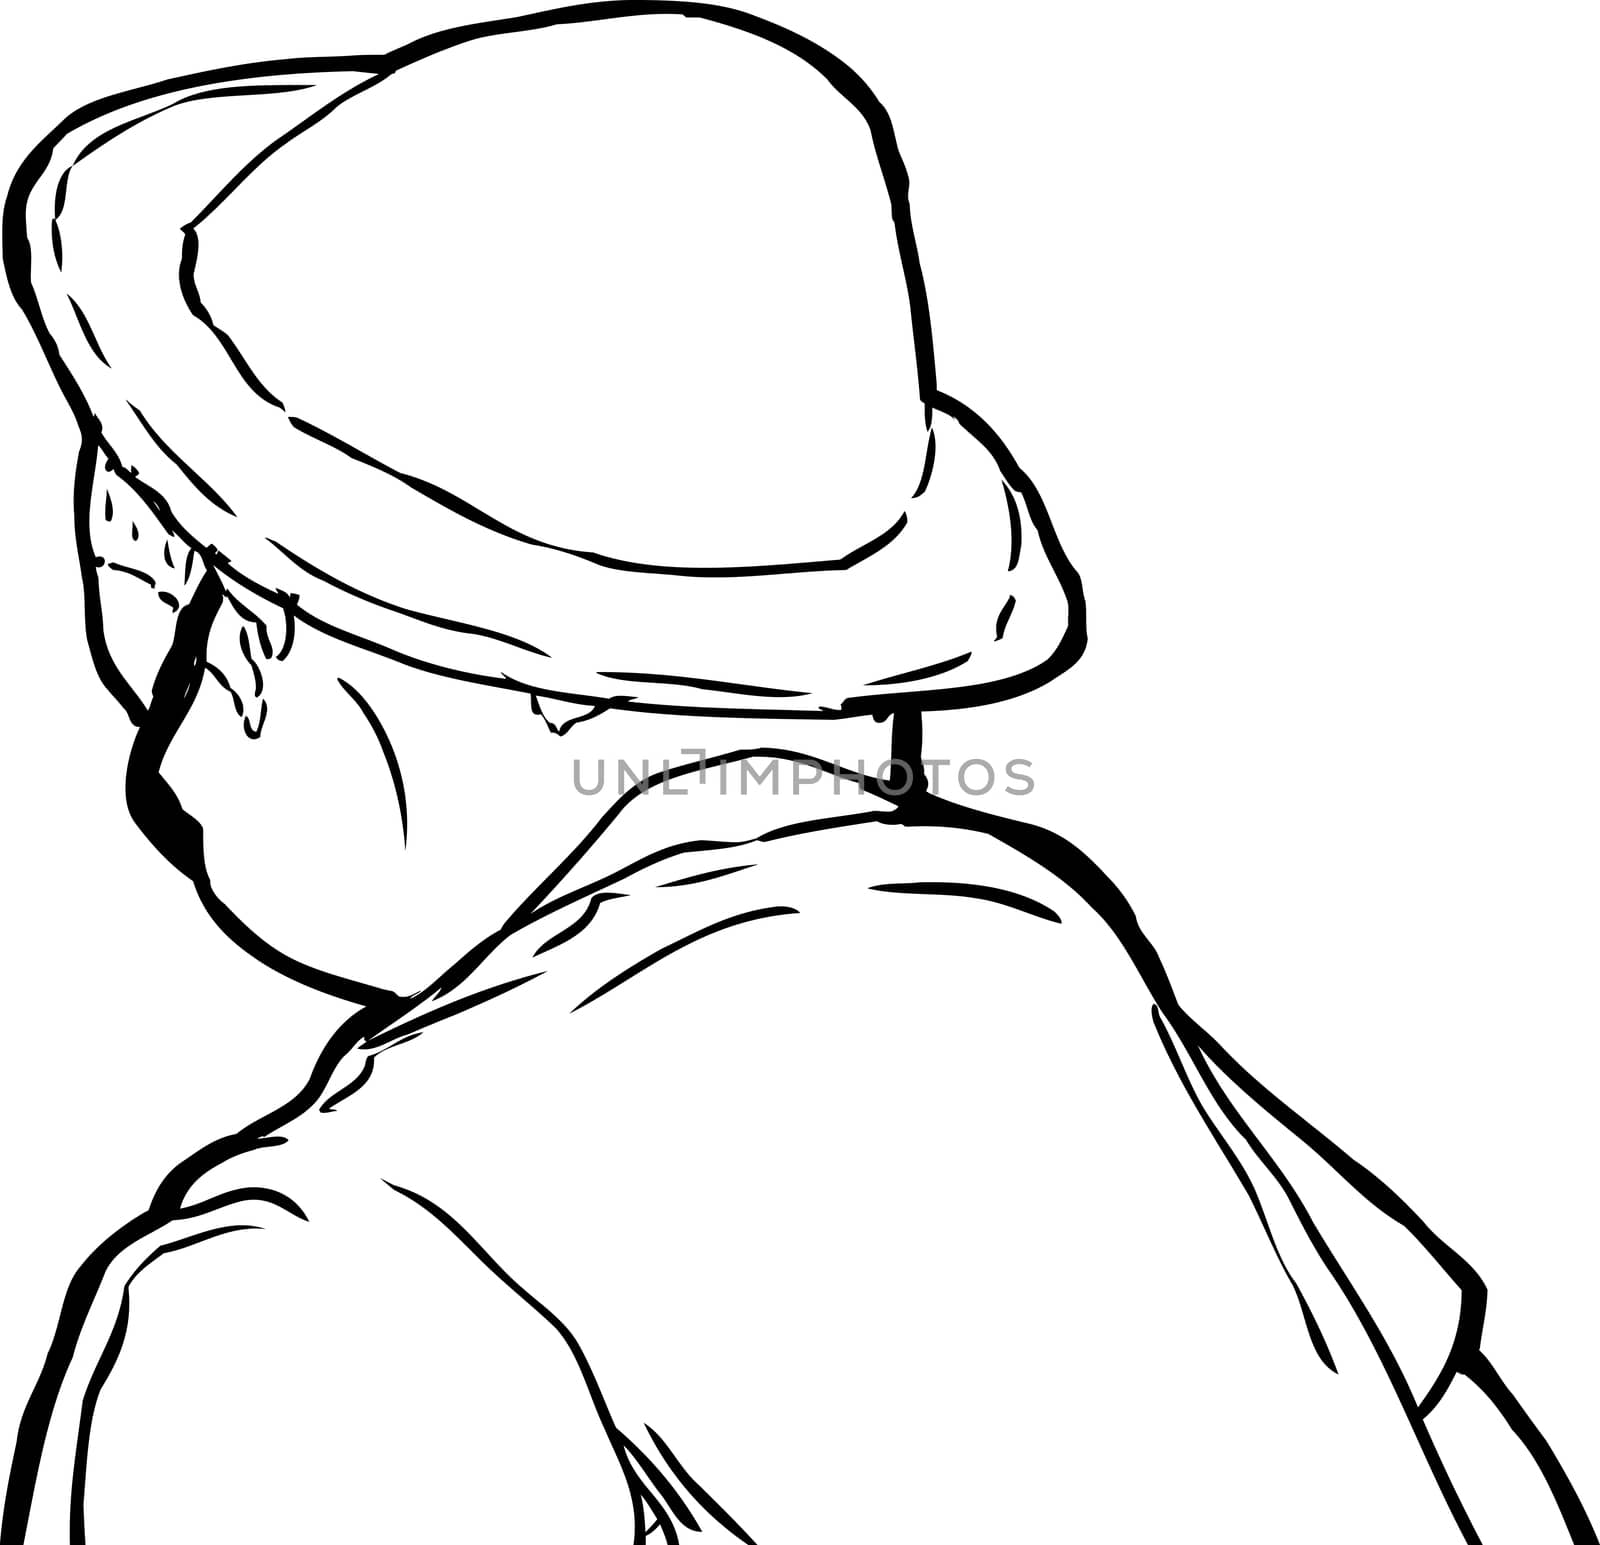 Outline of Man in Hat Looking Away by TheBlackRhino